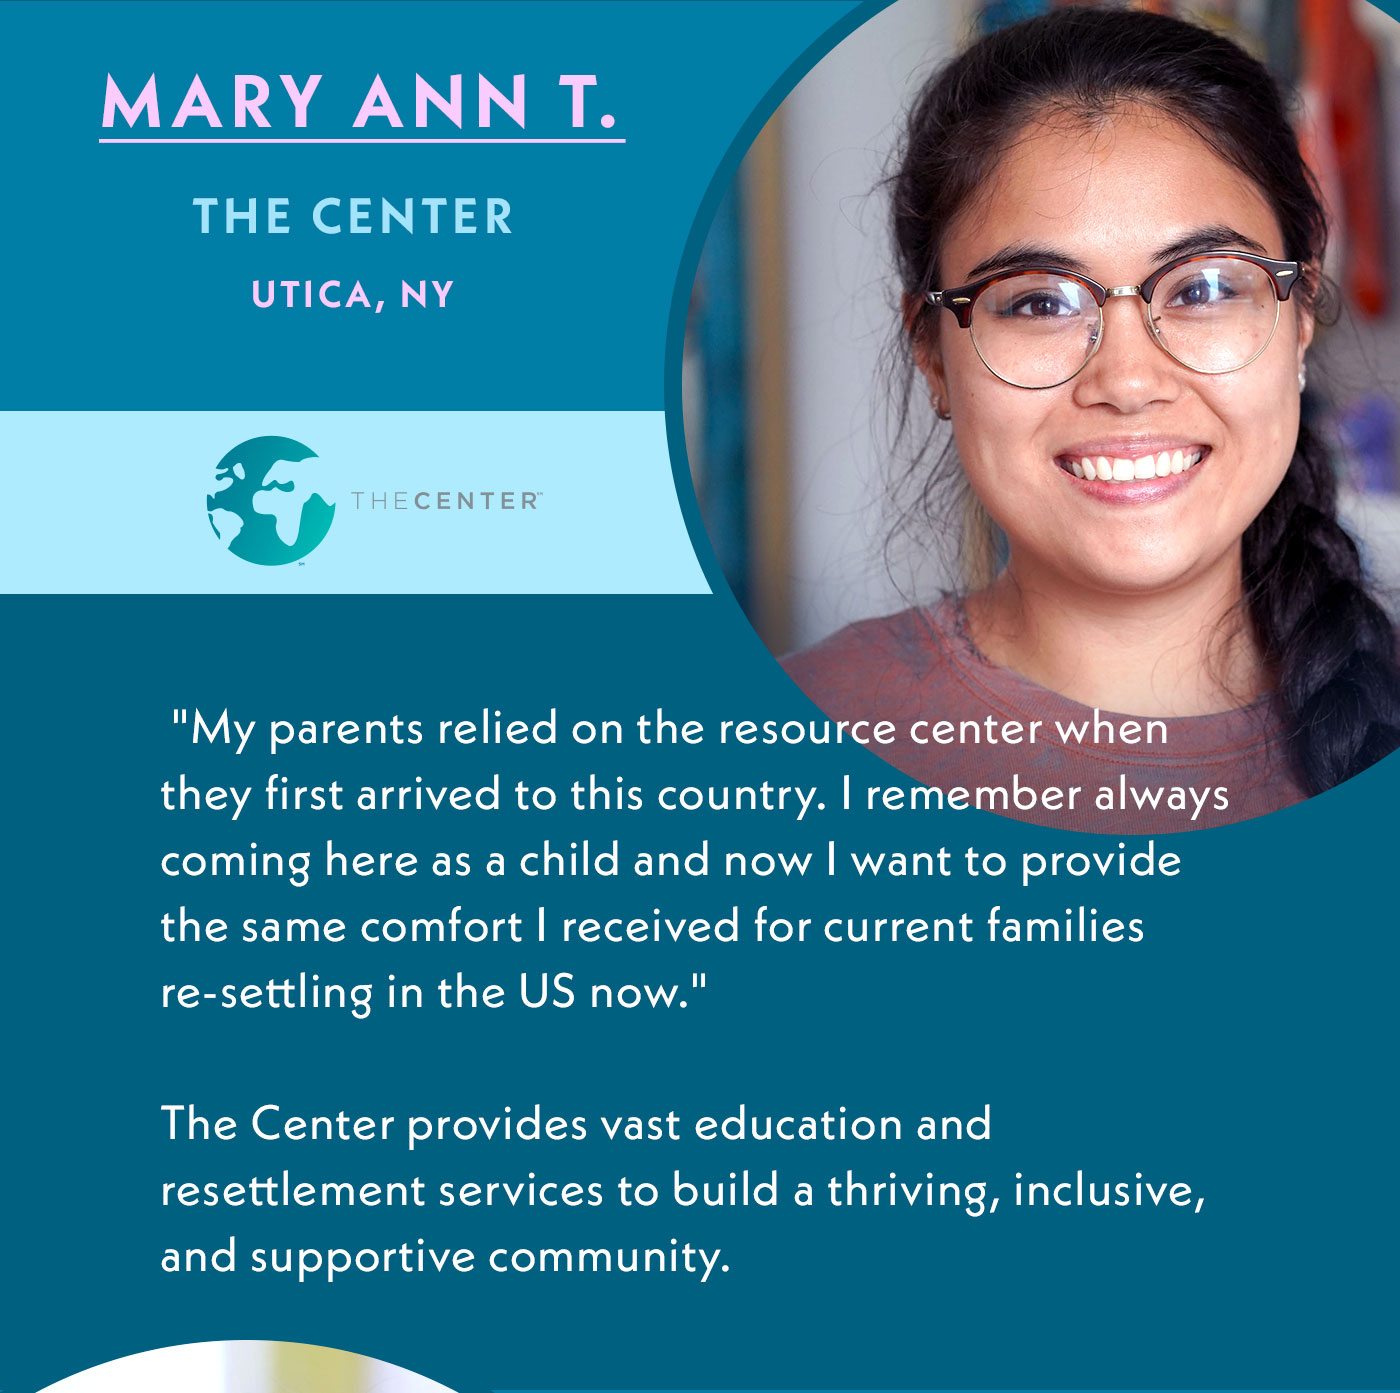 Mary Ann T. | The Center | Utica, NY | My parents relied on the resource center when they first arrived to this country. I remember always coming here as a child and now I want to provide the same comfort I received for current families re-settling in the US now. | The Center provides vast education and resettlement services to build a thriving, inclusive, and supporting community.